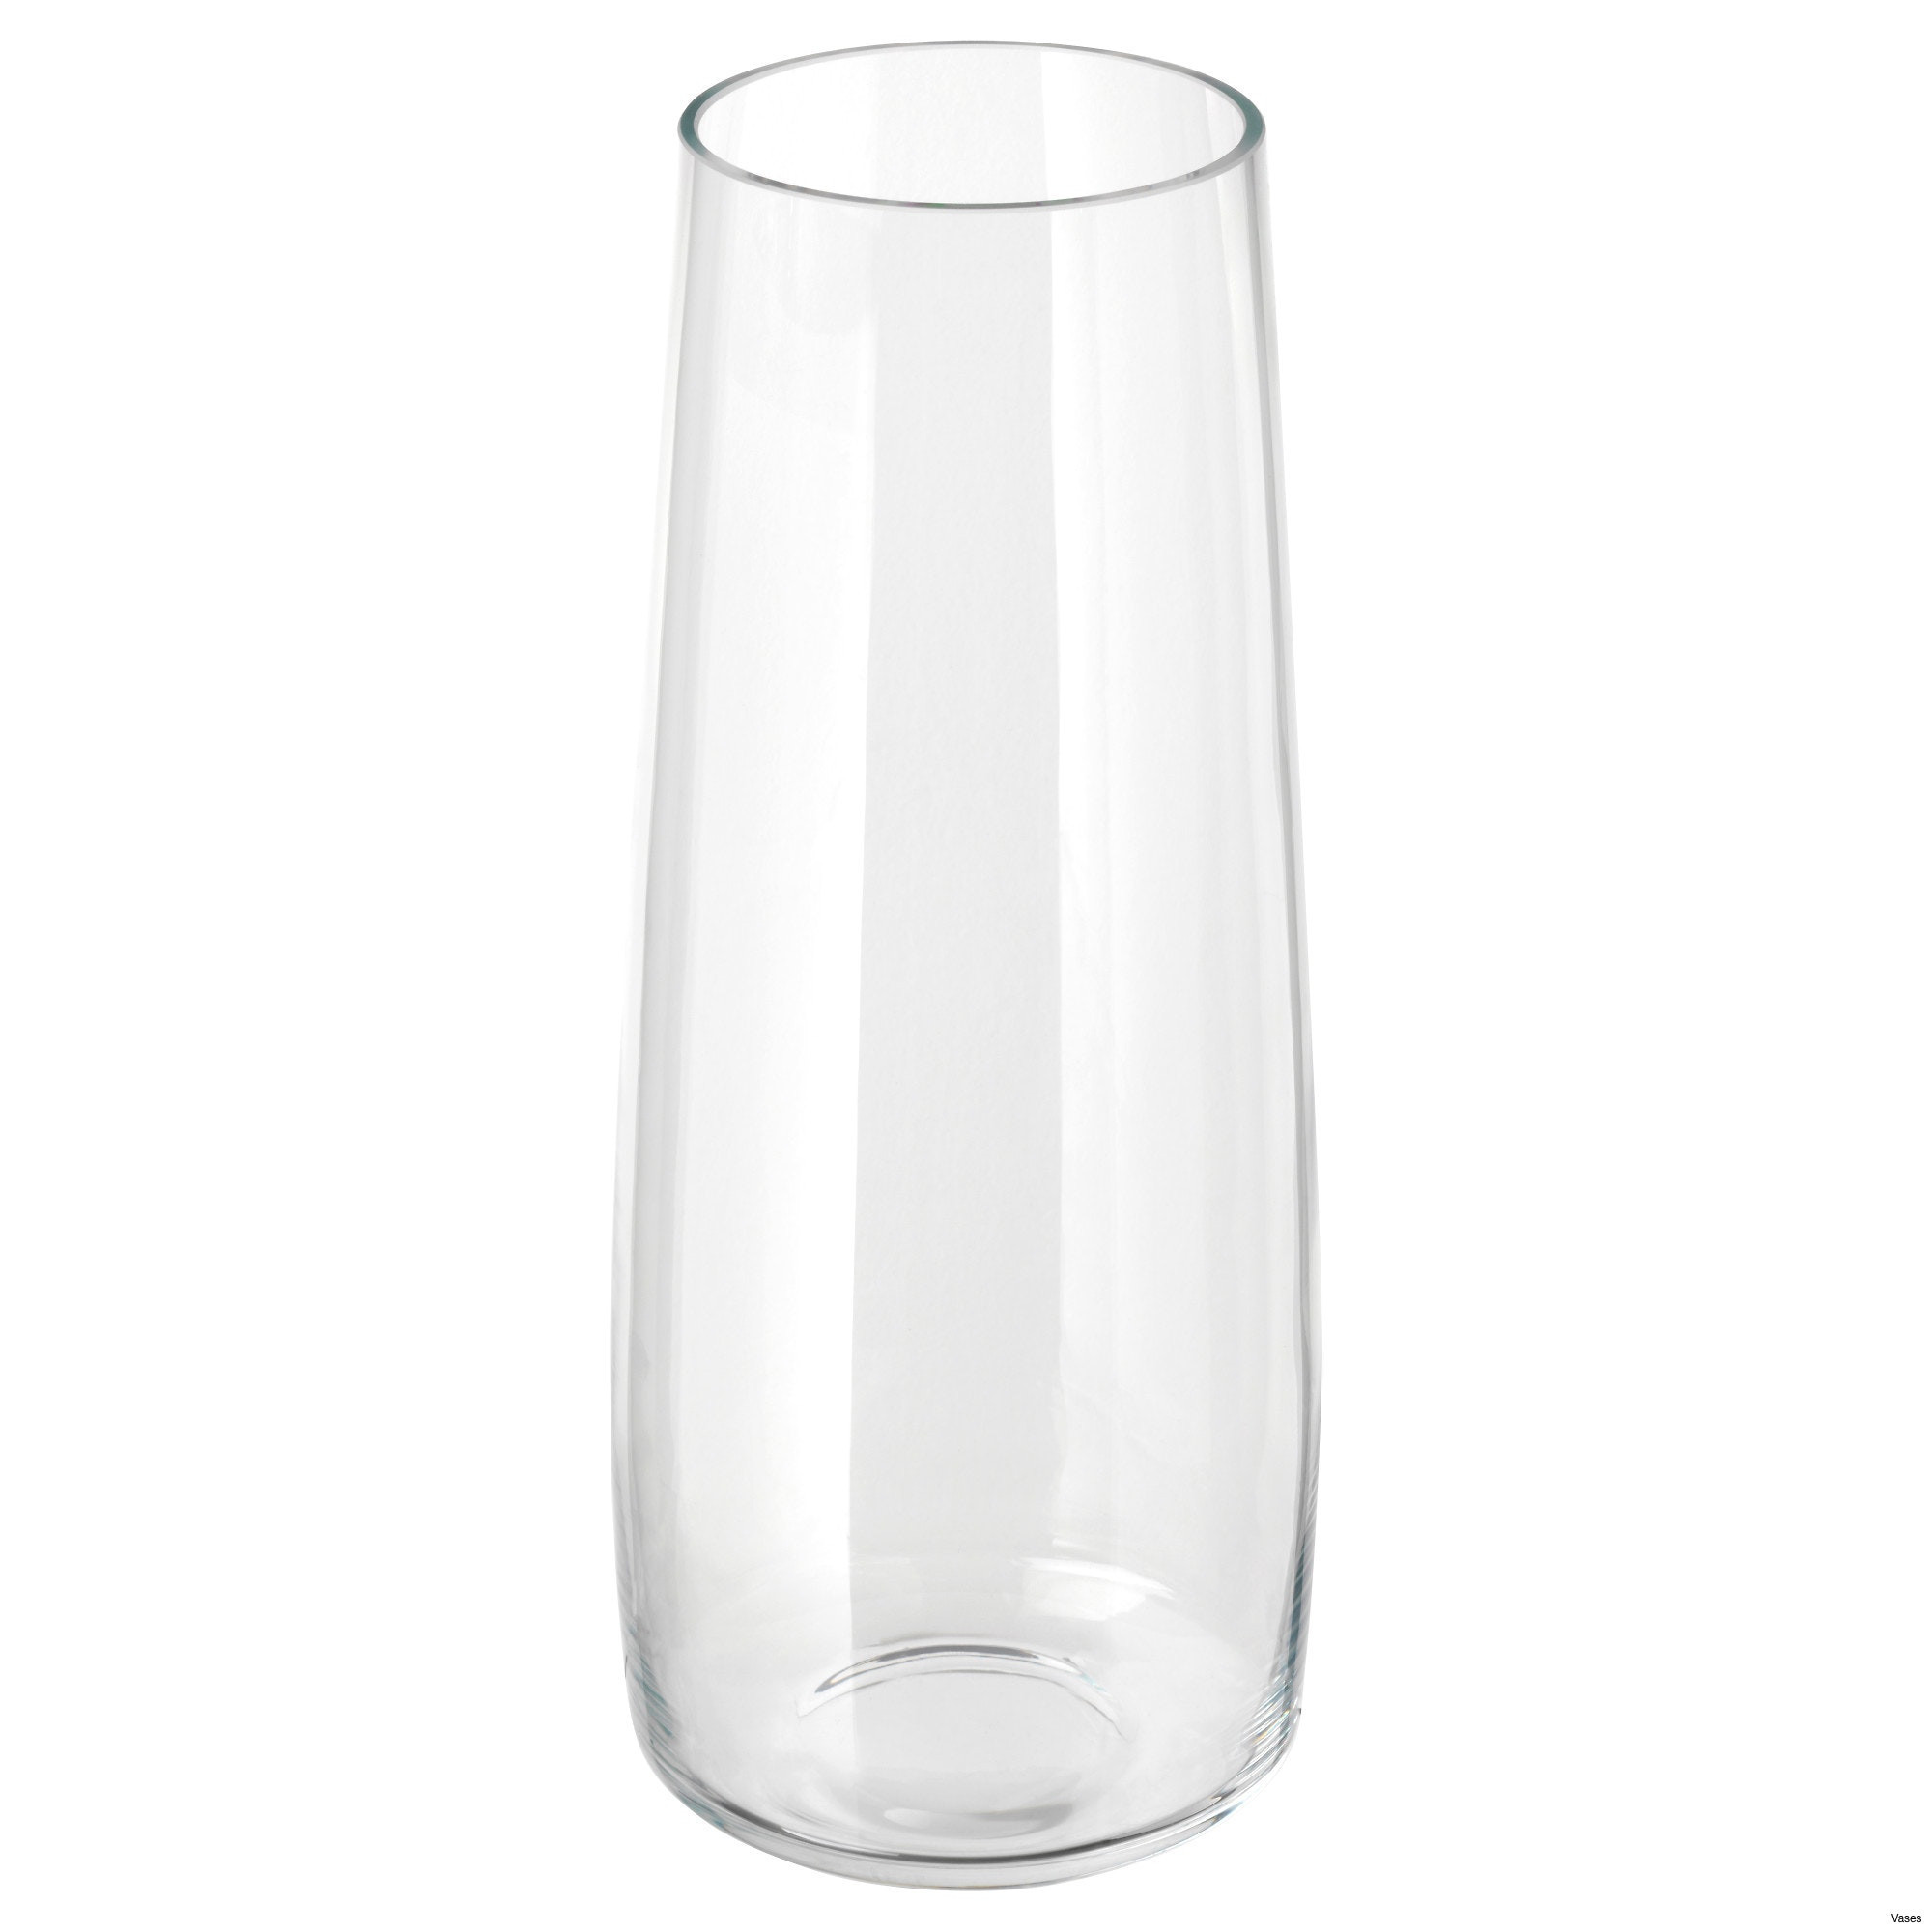 27 Stylish 32 Inch Cylinder Vase 2024 free download 32 inch cylinder vase of round glass vases pictures vases bubble ball discount 15 vase round for round glass vases photograph clear glass planters fresh clear glass vases of round glass vase